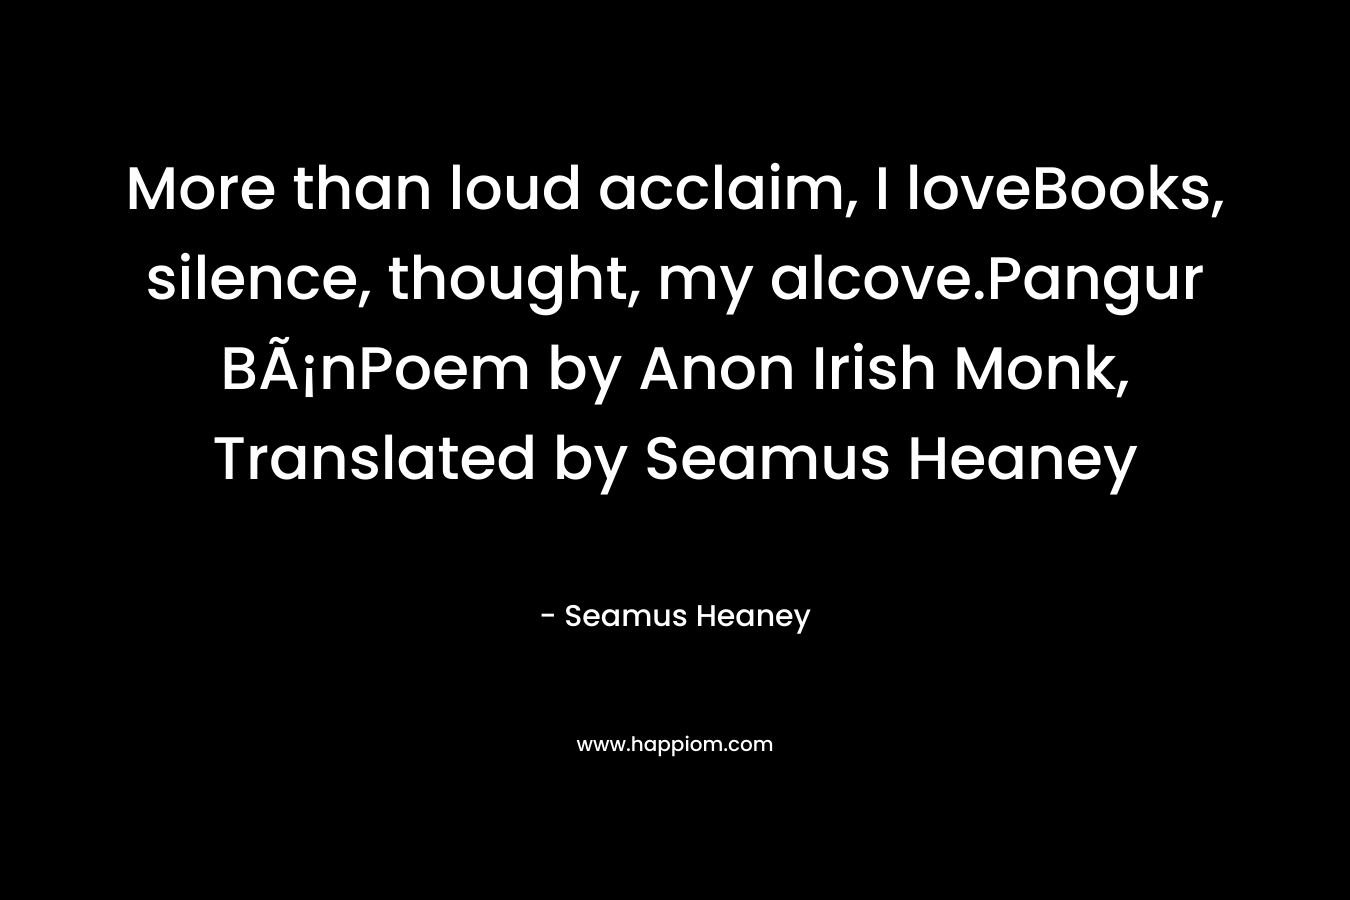 More than loud acclaim, I loveBooks, silence, thought, my alcove.Pangur BÃ¡nPoem by Anon Irish Monk, Translated by Seamus Heaney